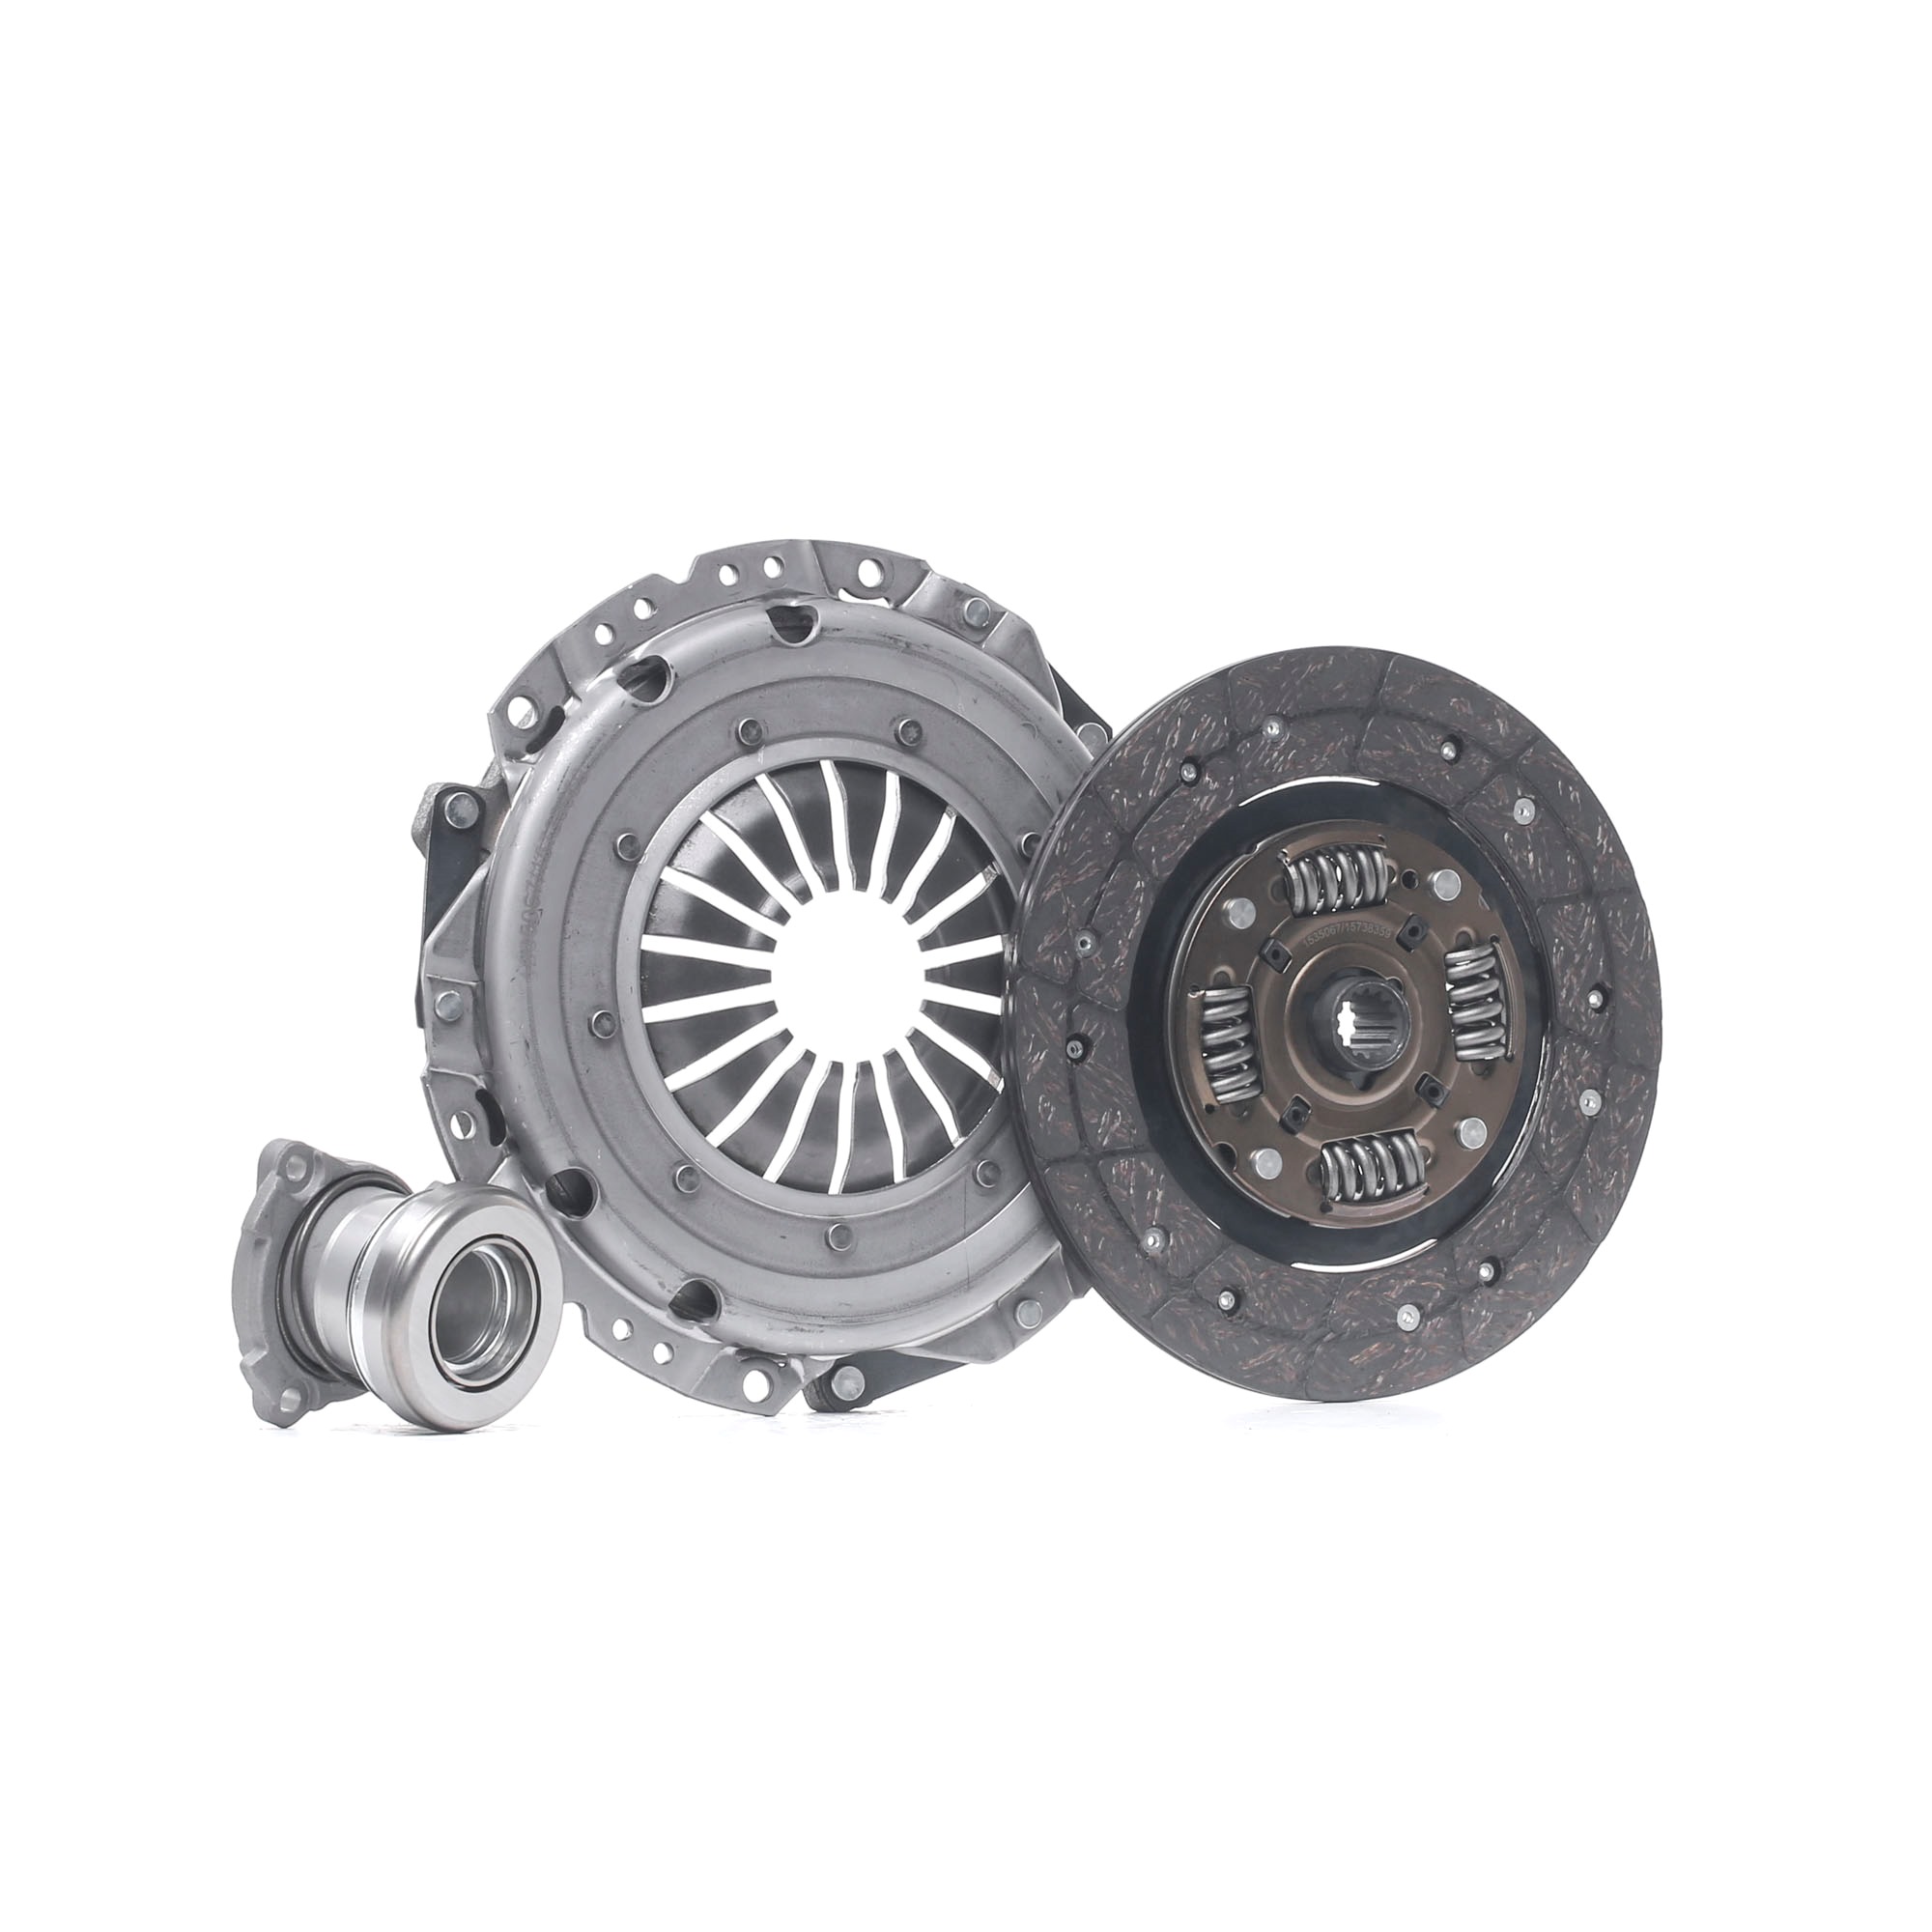 Original RIDEX Clutch replacement kit 479C0823 for OPEL CORSA